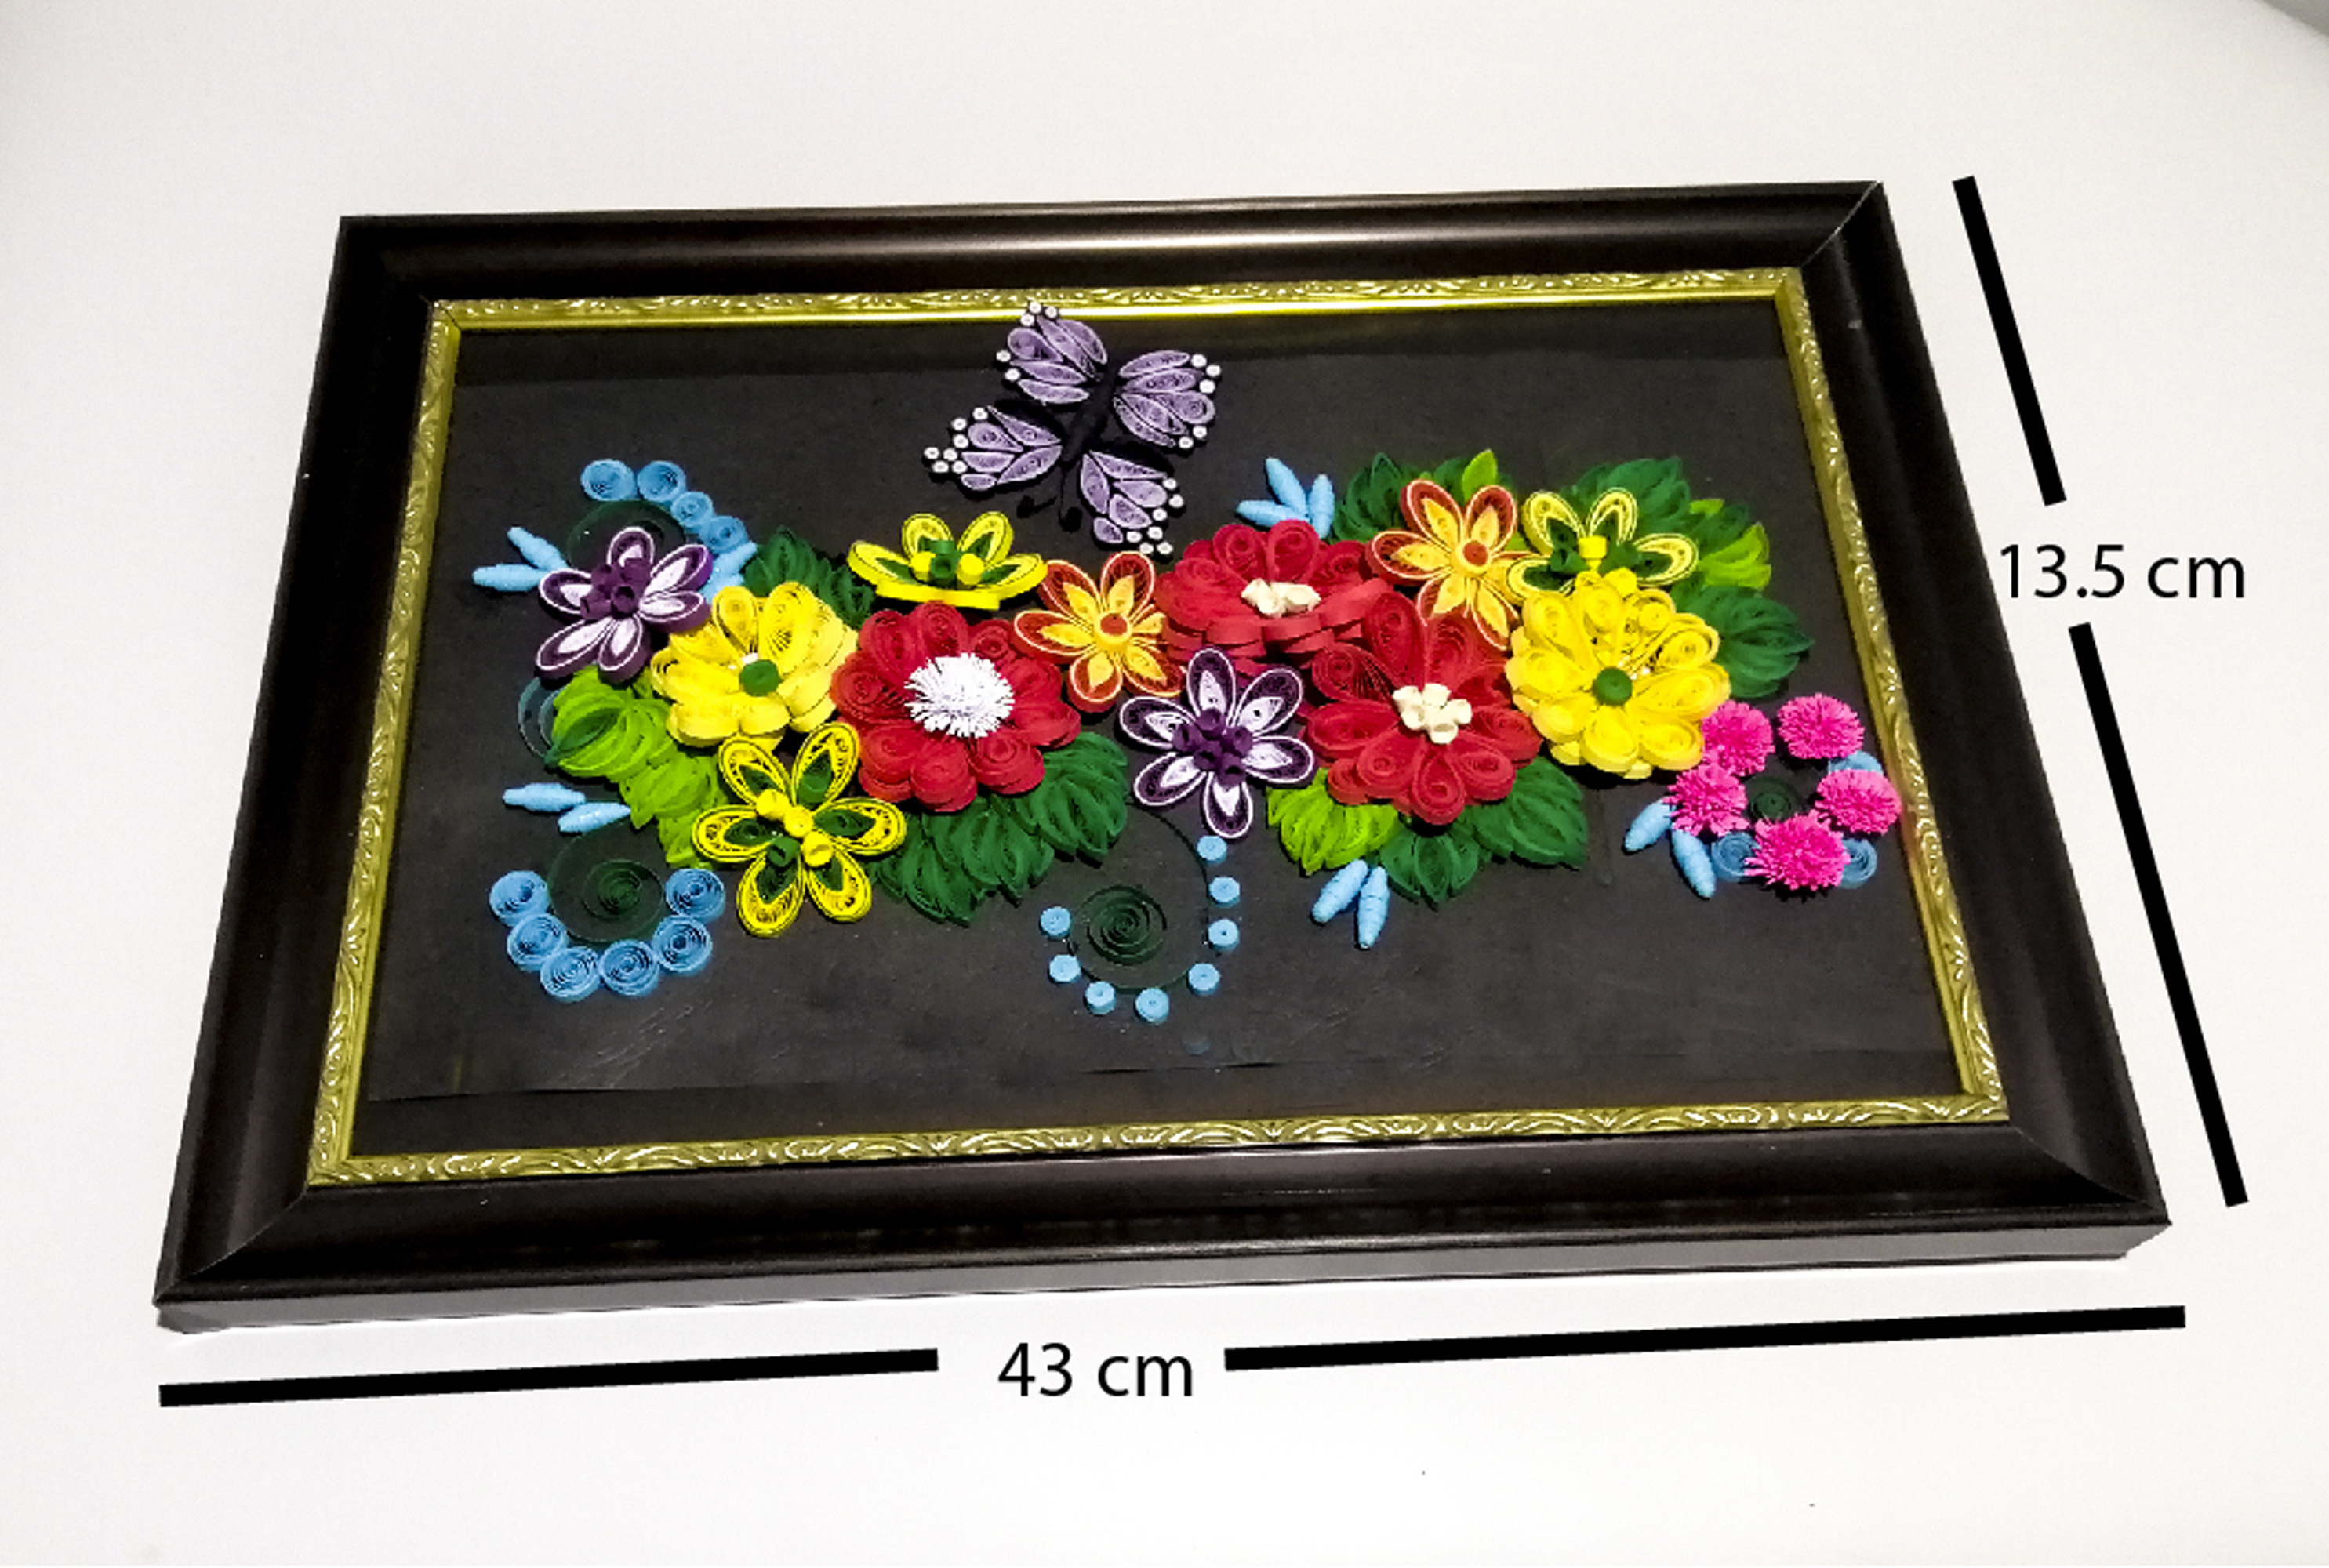 A Beginner's Guide to Quilling Paper Flowers (9780804855716